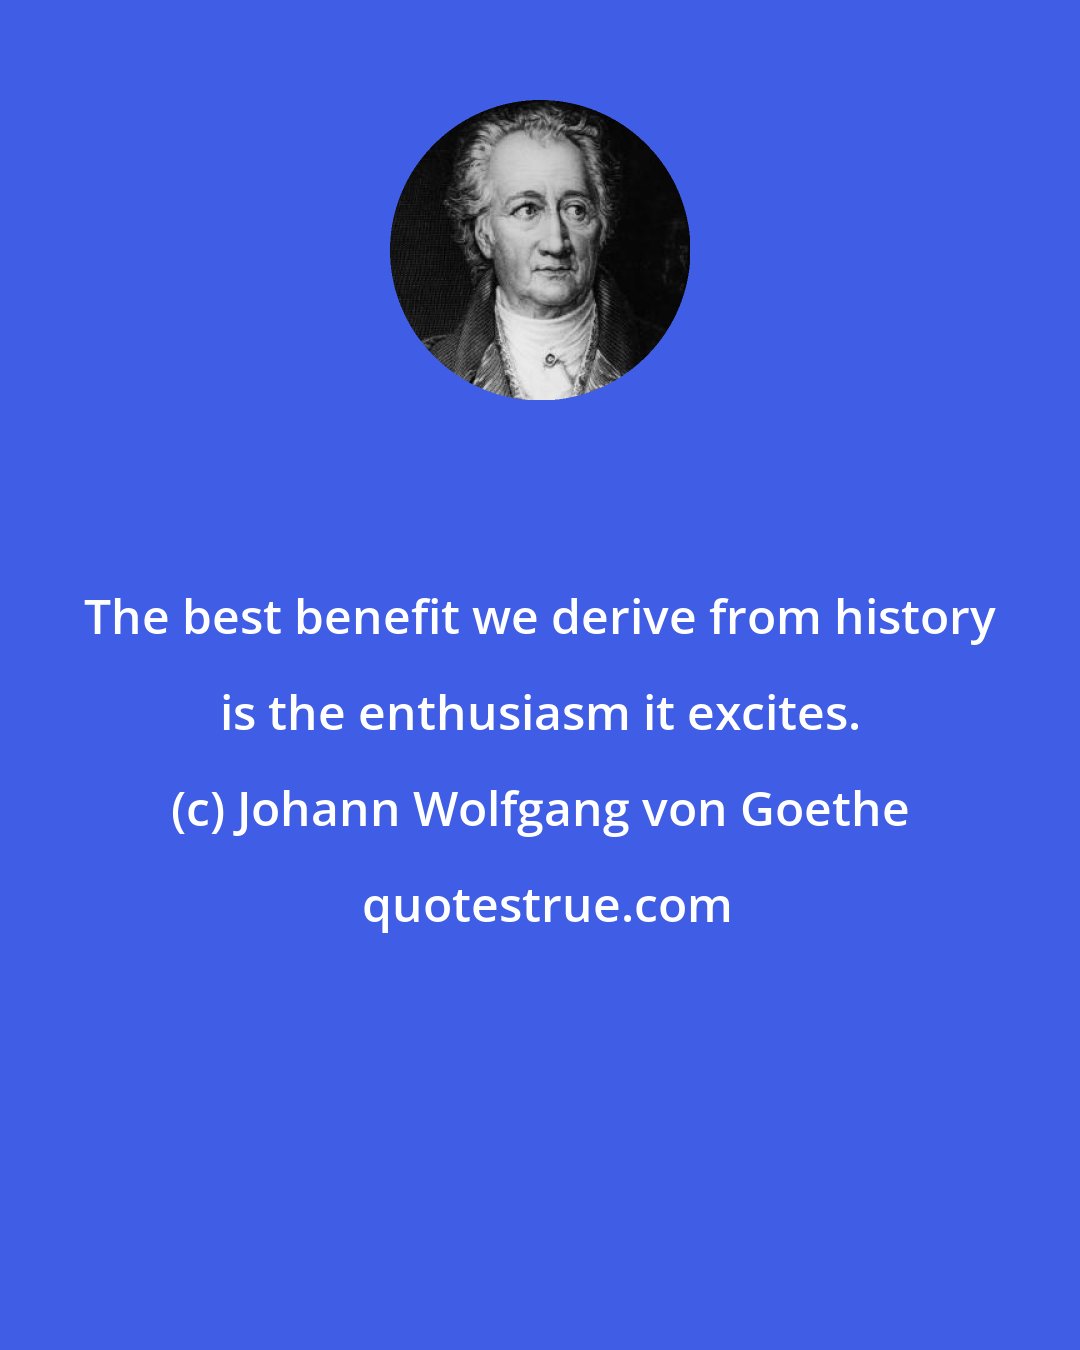 Johann Wolfgang von Goethe: The best benefit we derive from history is the enthusiasm it excites.